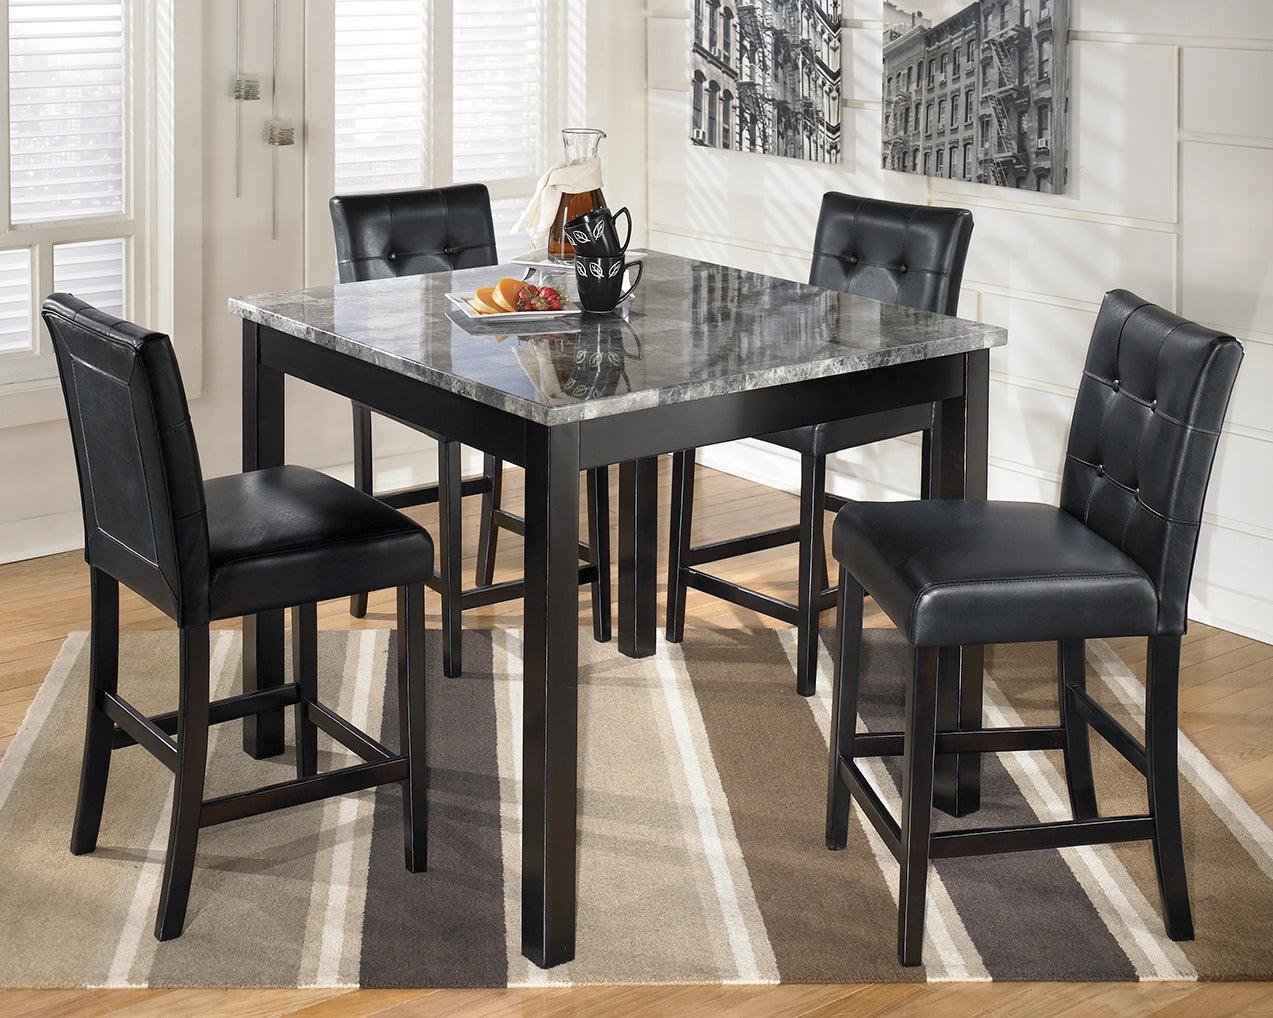 Maysville Black Counter Height Dining Table And Bar Stools (Set Of 5)